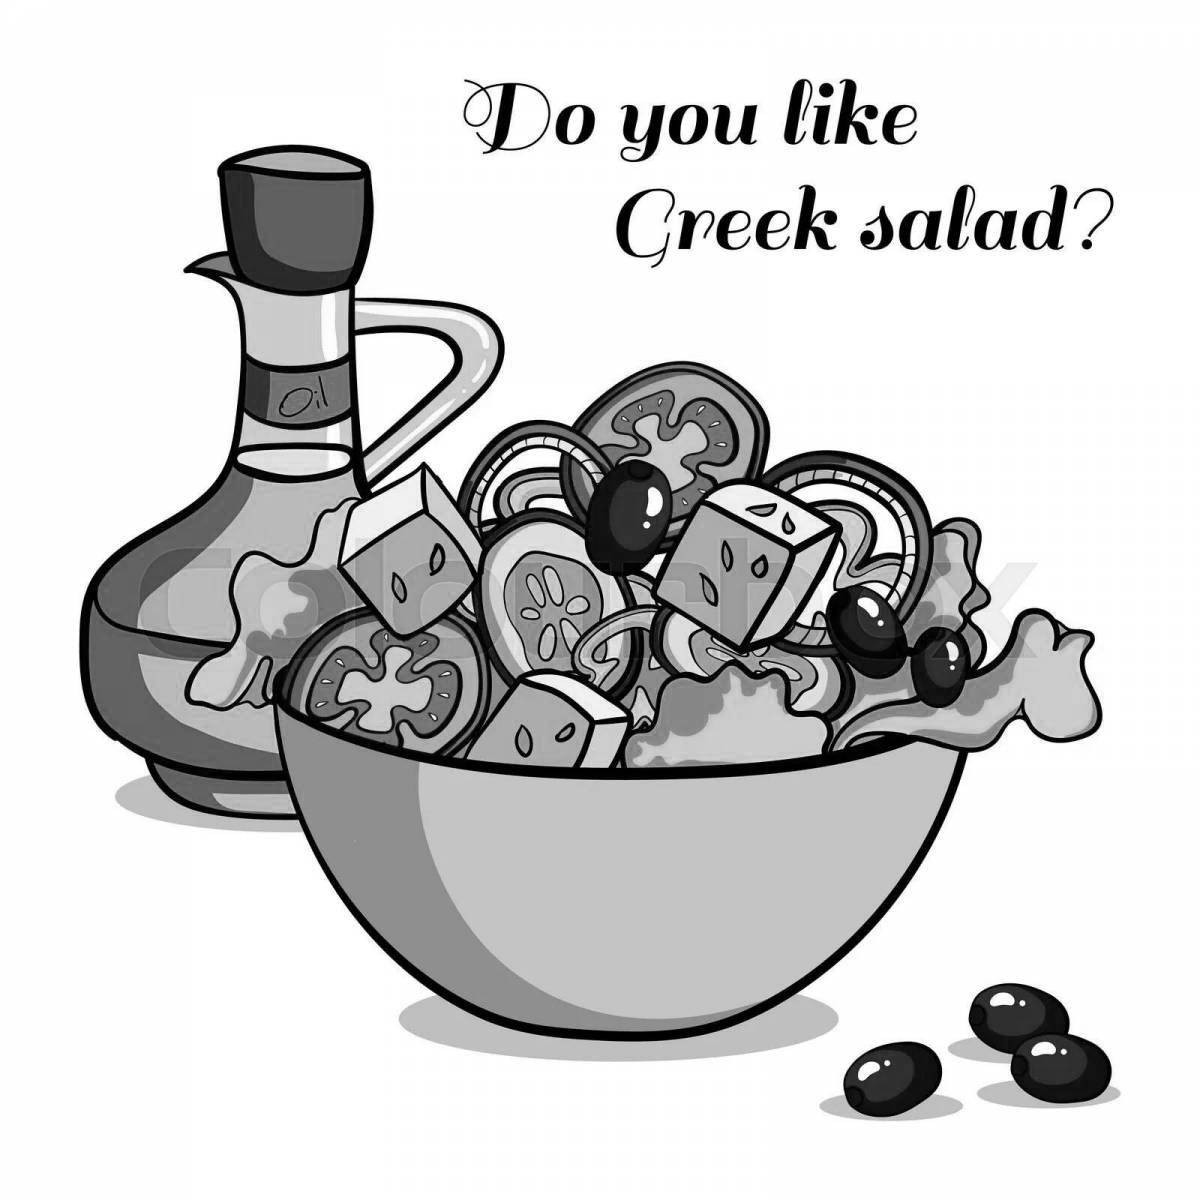 Coloring page for a seductive Greek salad